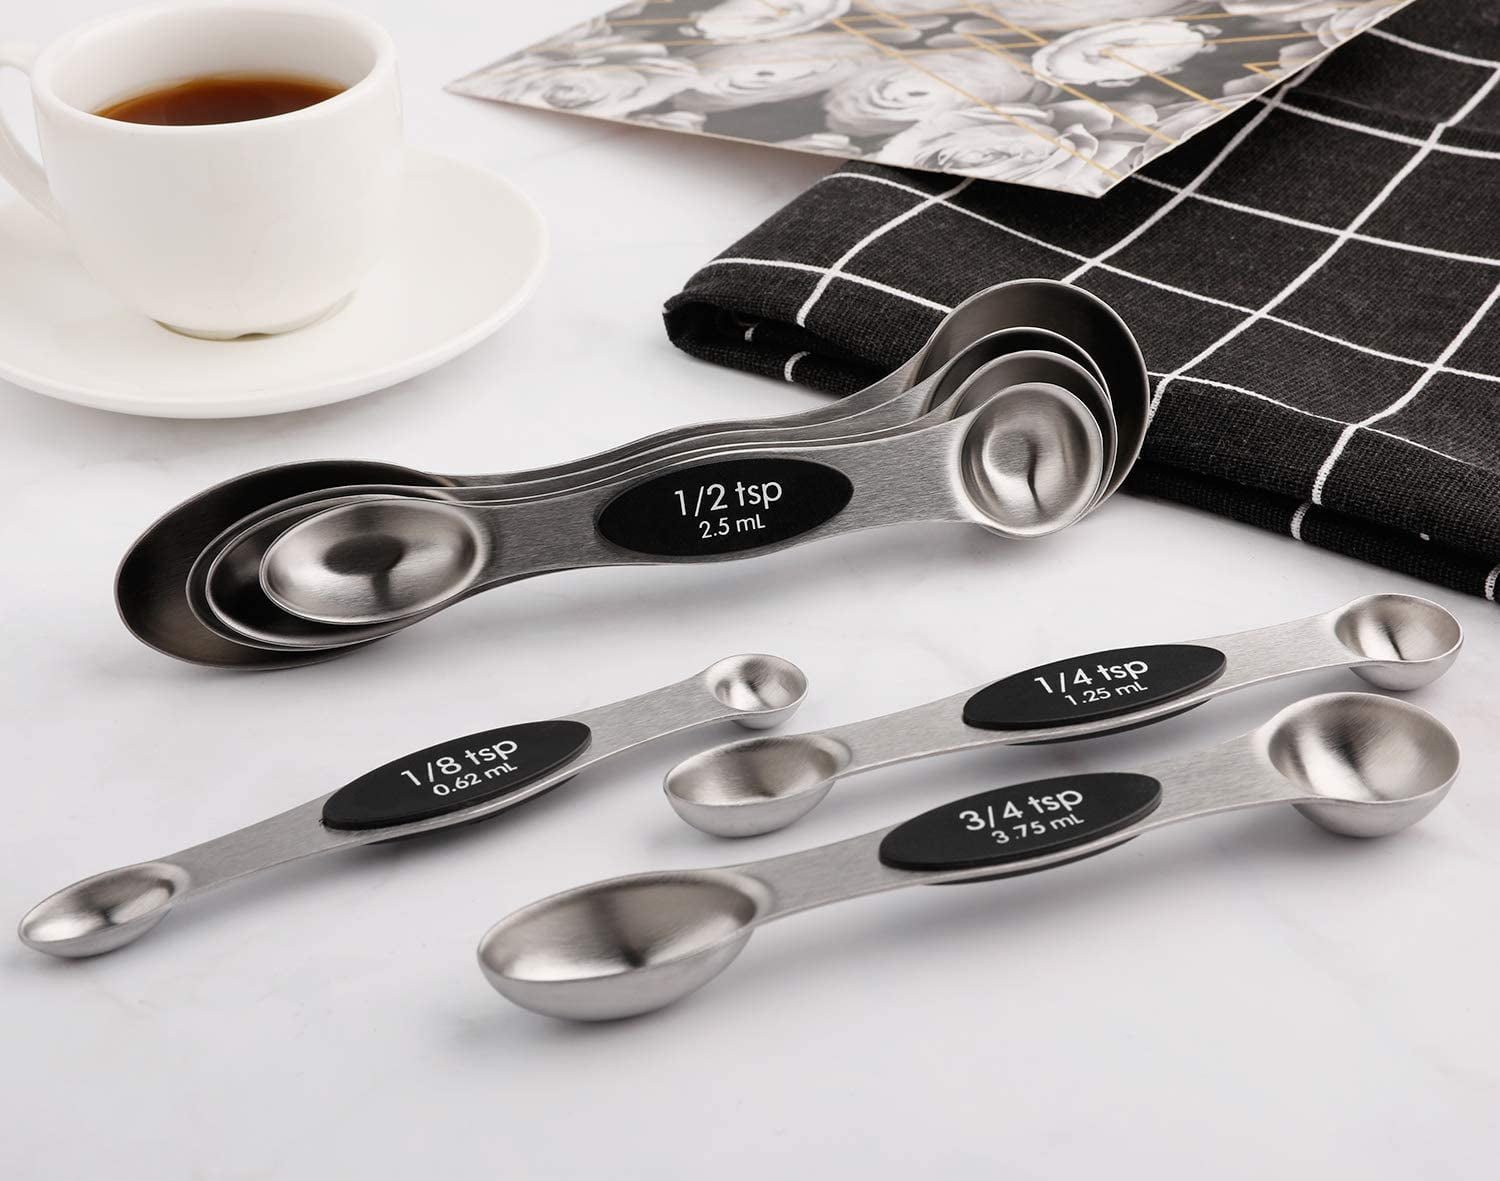  Magnetic Measuring Spoons Set of 7 Stainless Steel Dual Sided Teaspoon  Tablespoon for Measuring Dry and Liquid Ingredients : Home & Kitchen